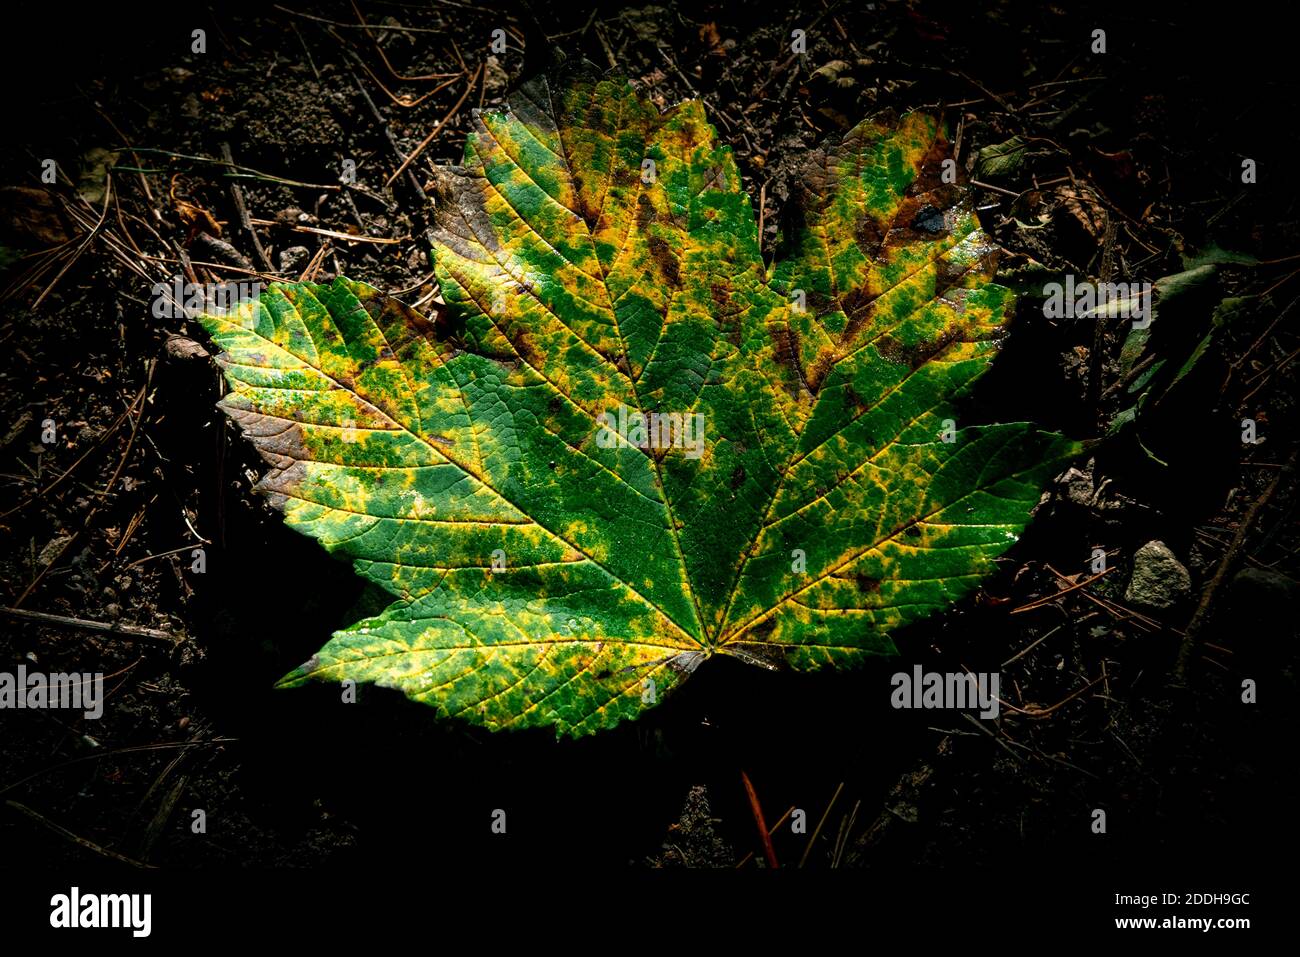 Green autumnal leaf laying on soil Stock Photo